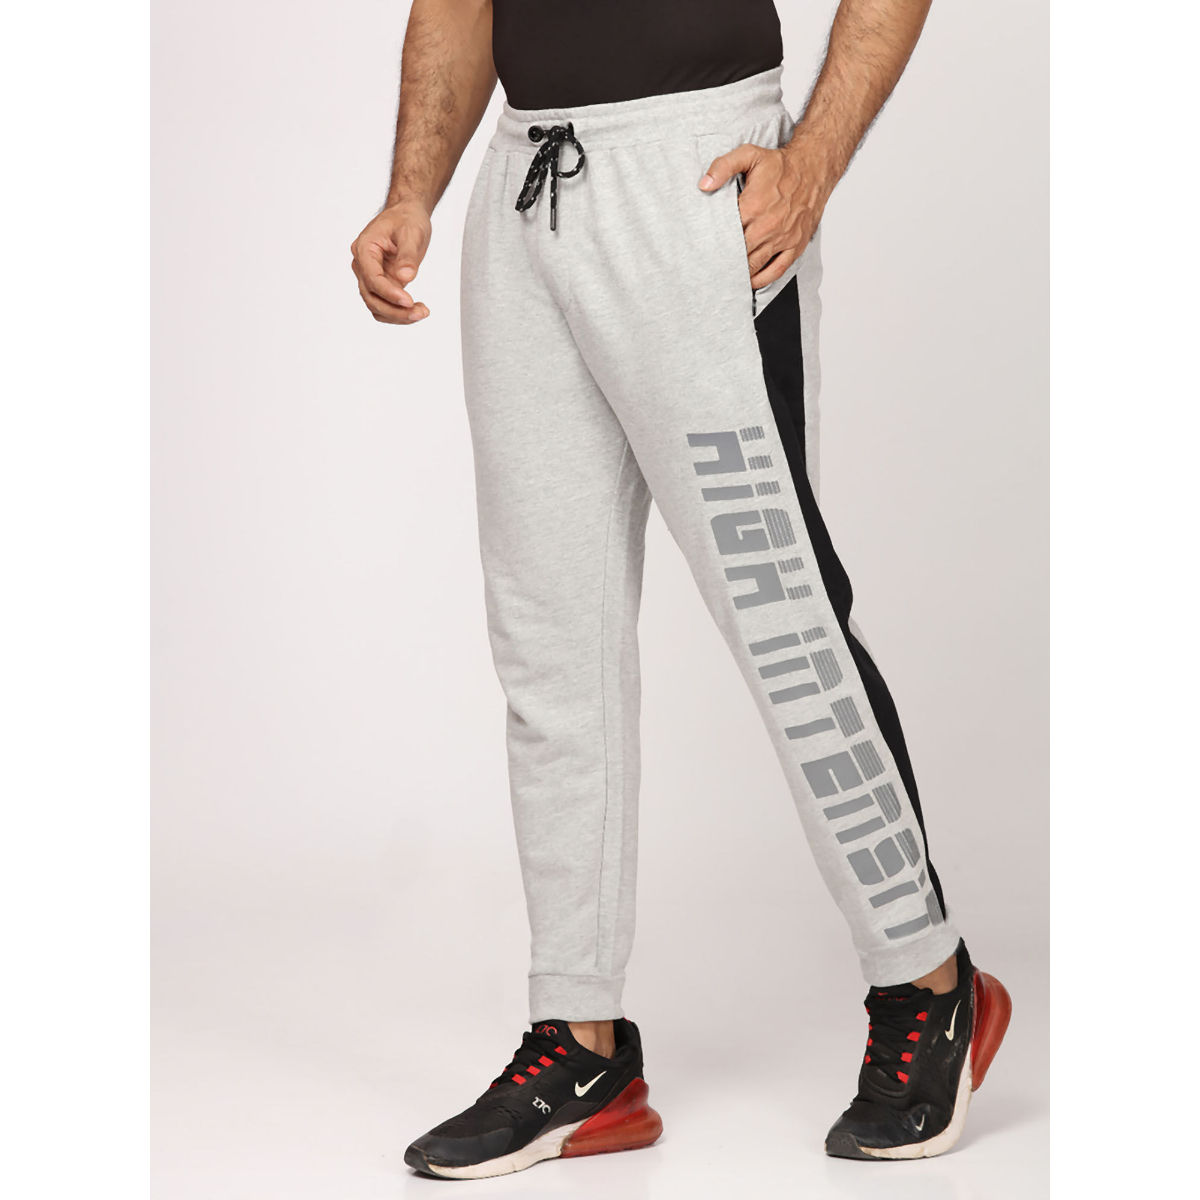 The 19 Best Track Pants to Shop For Men in 2022